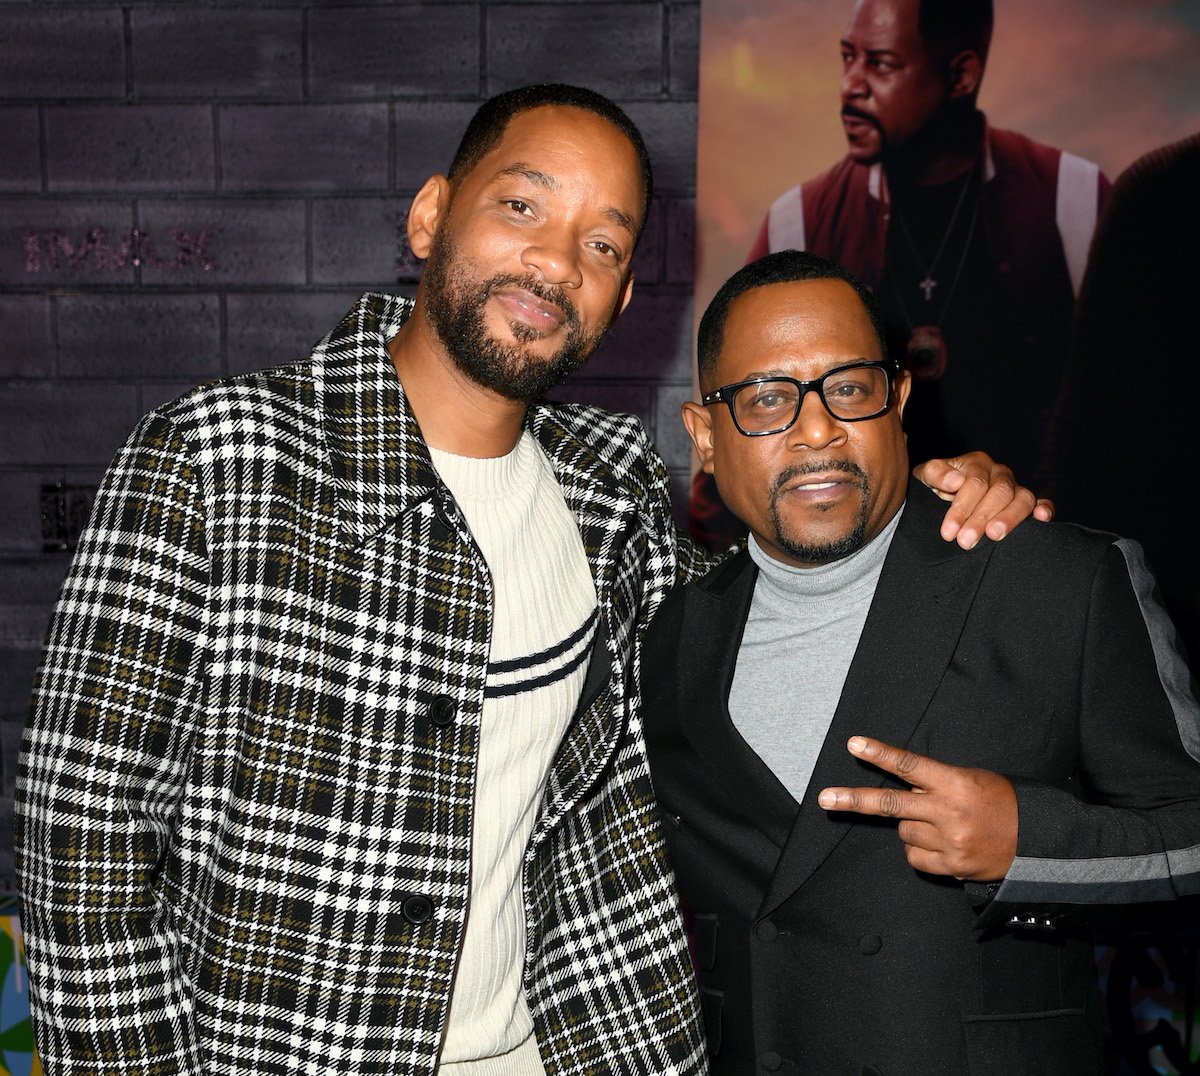 Will Smith and Martin Lawrence at the 'Bad Boys For Life' premiere